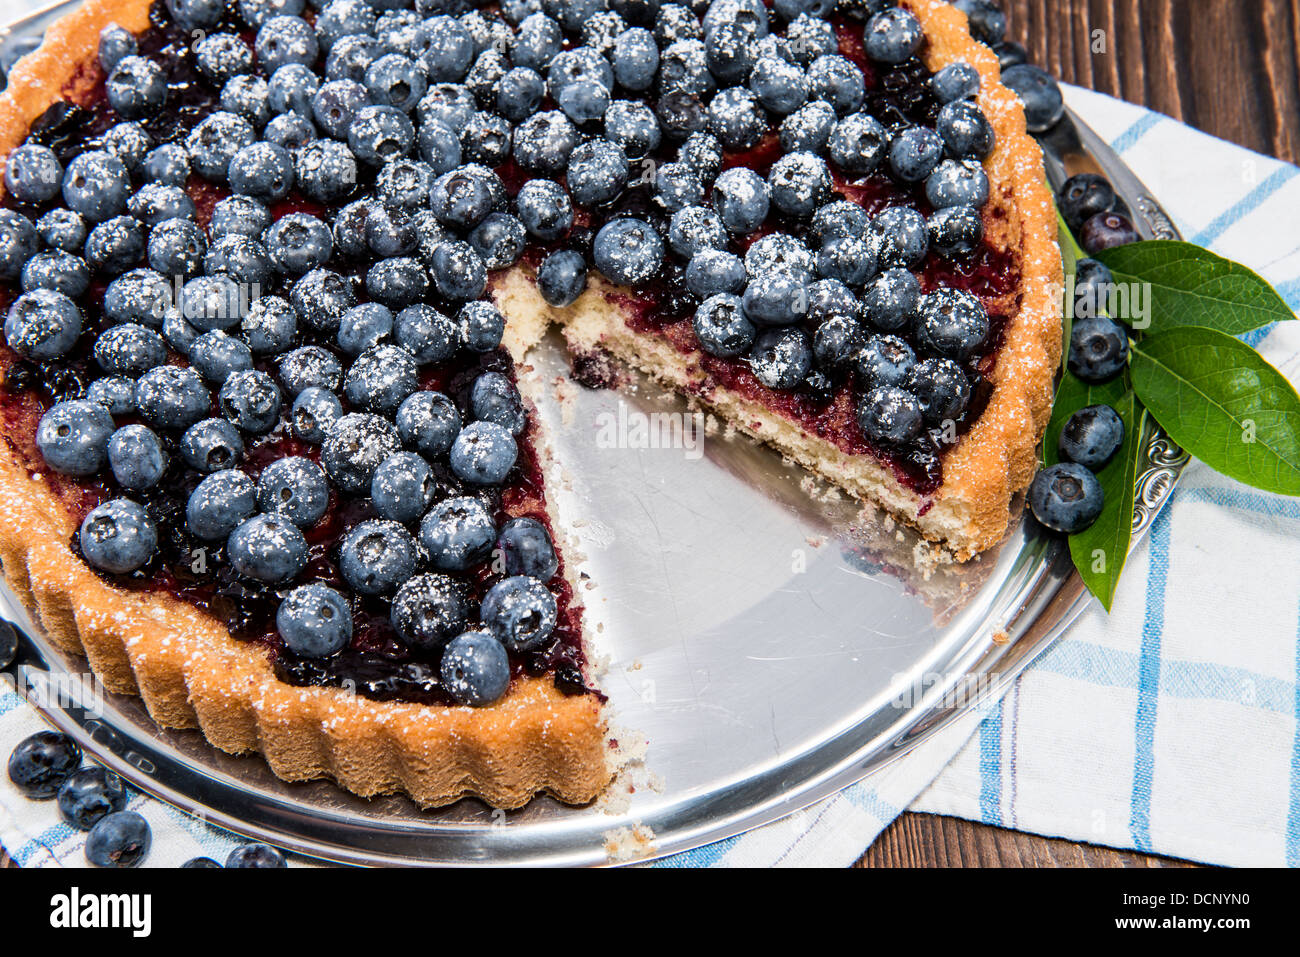 Delicious Blueberry Tart with fresh fruits Stock Photo